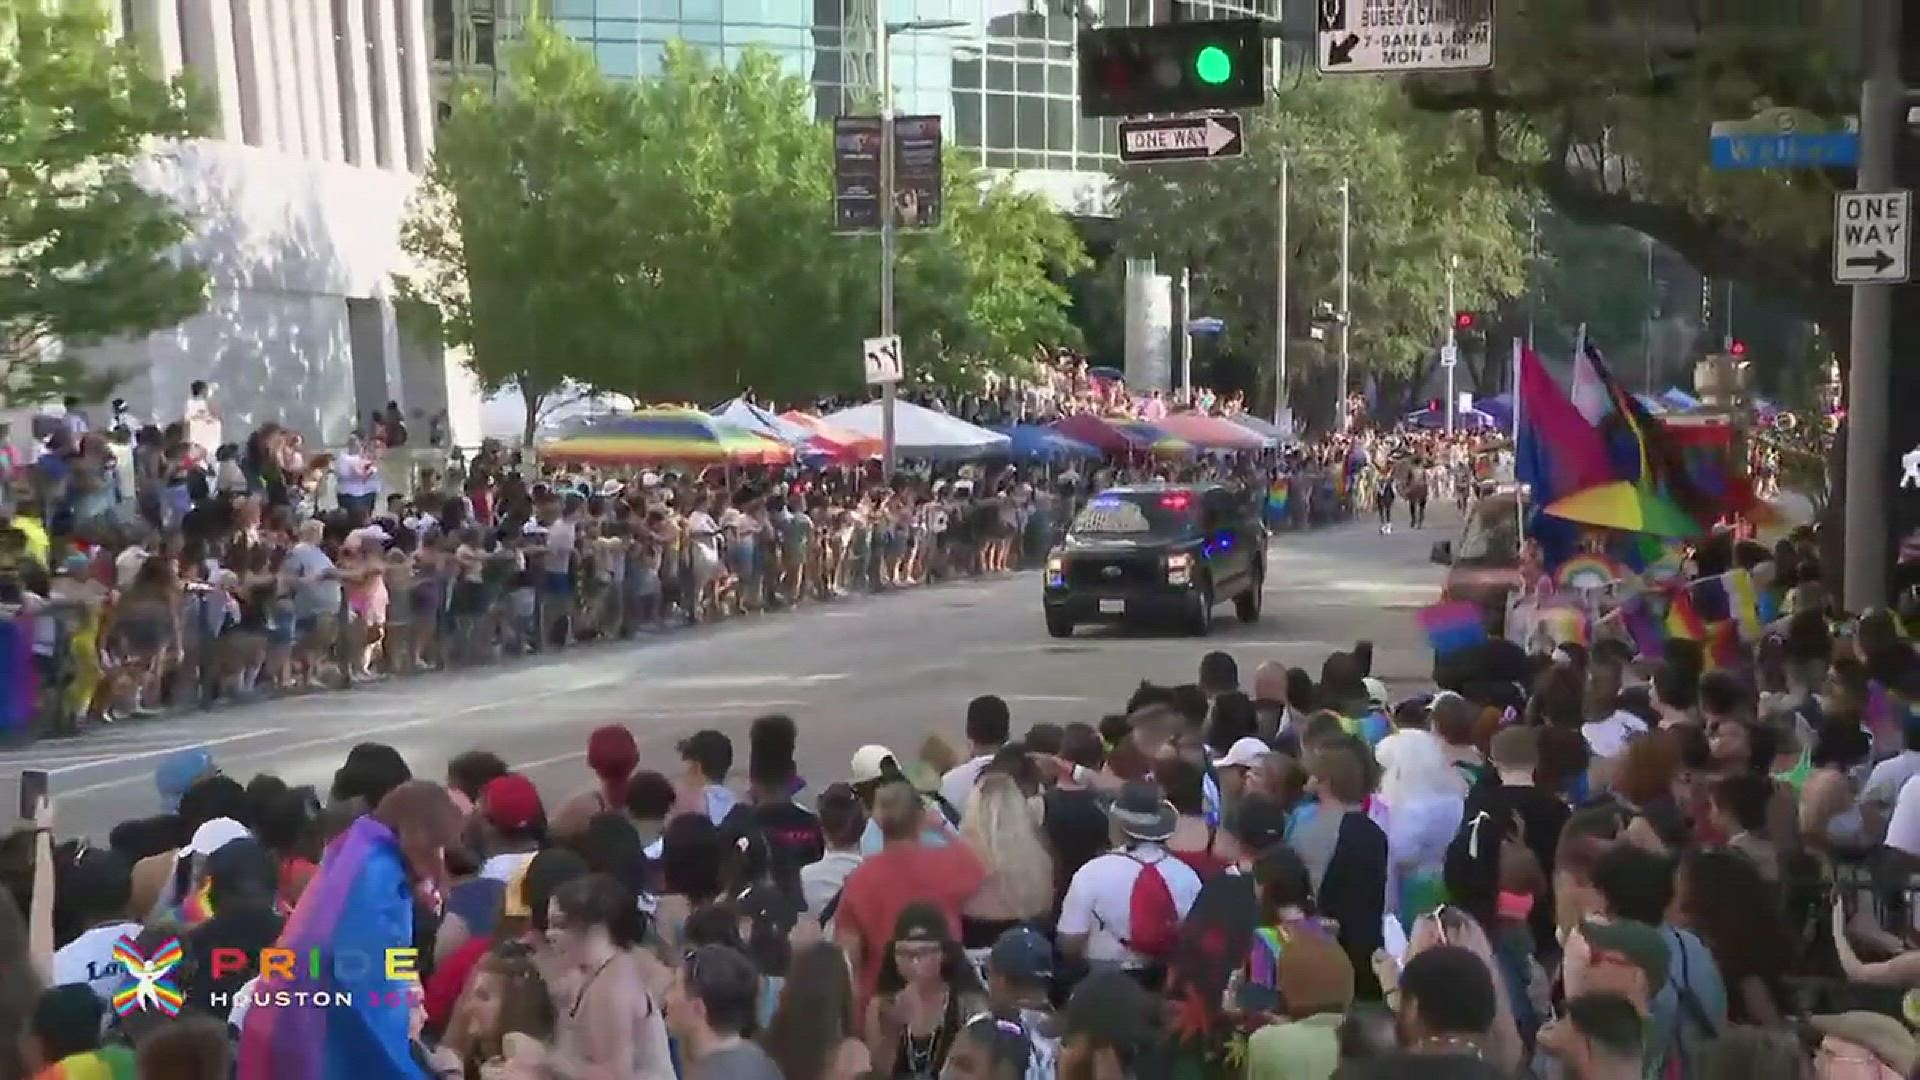 This is KHOU 11 coverage of the Pride Houston 365 parade, which took place on Saturday, June 25.